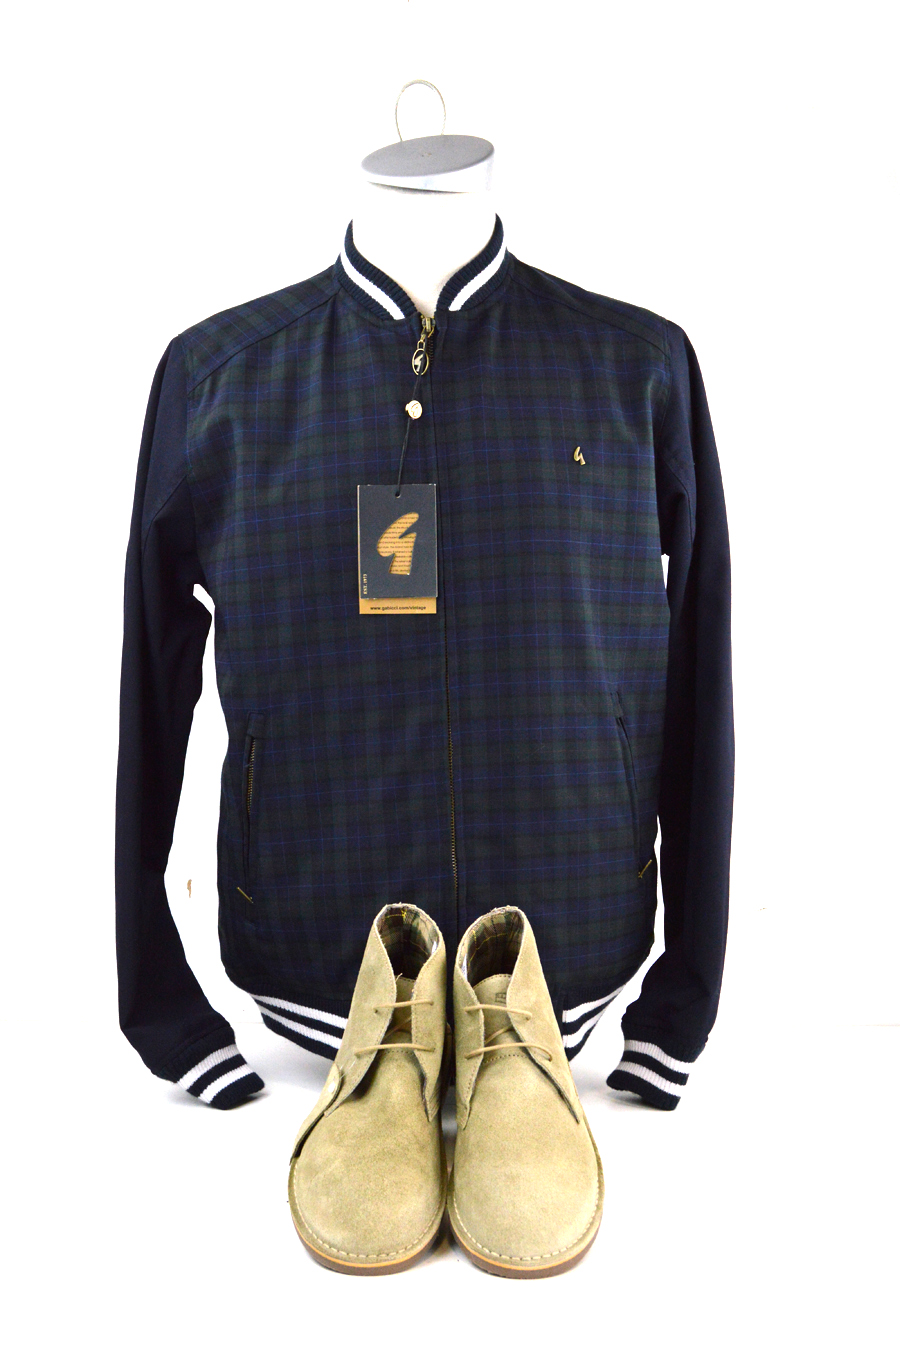 04 mod shoes desert boots with blue and green tartan jacket from gabicci